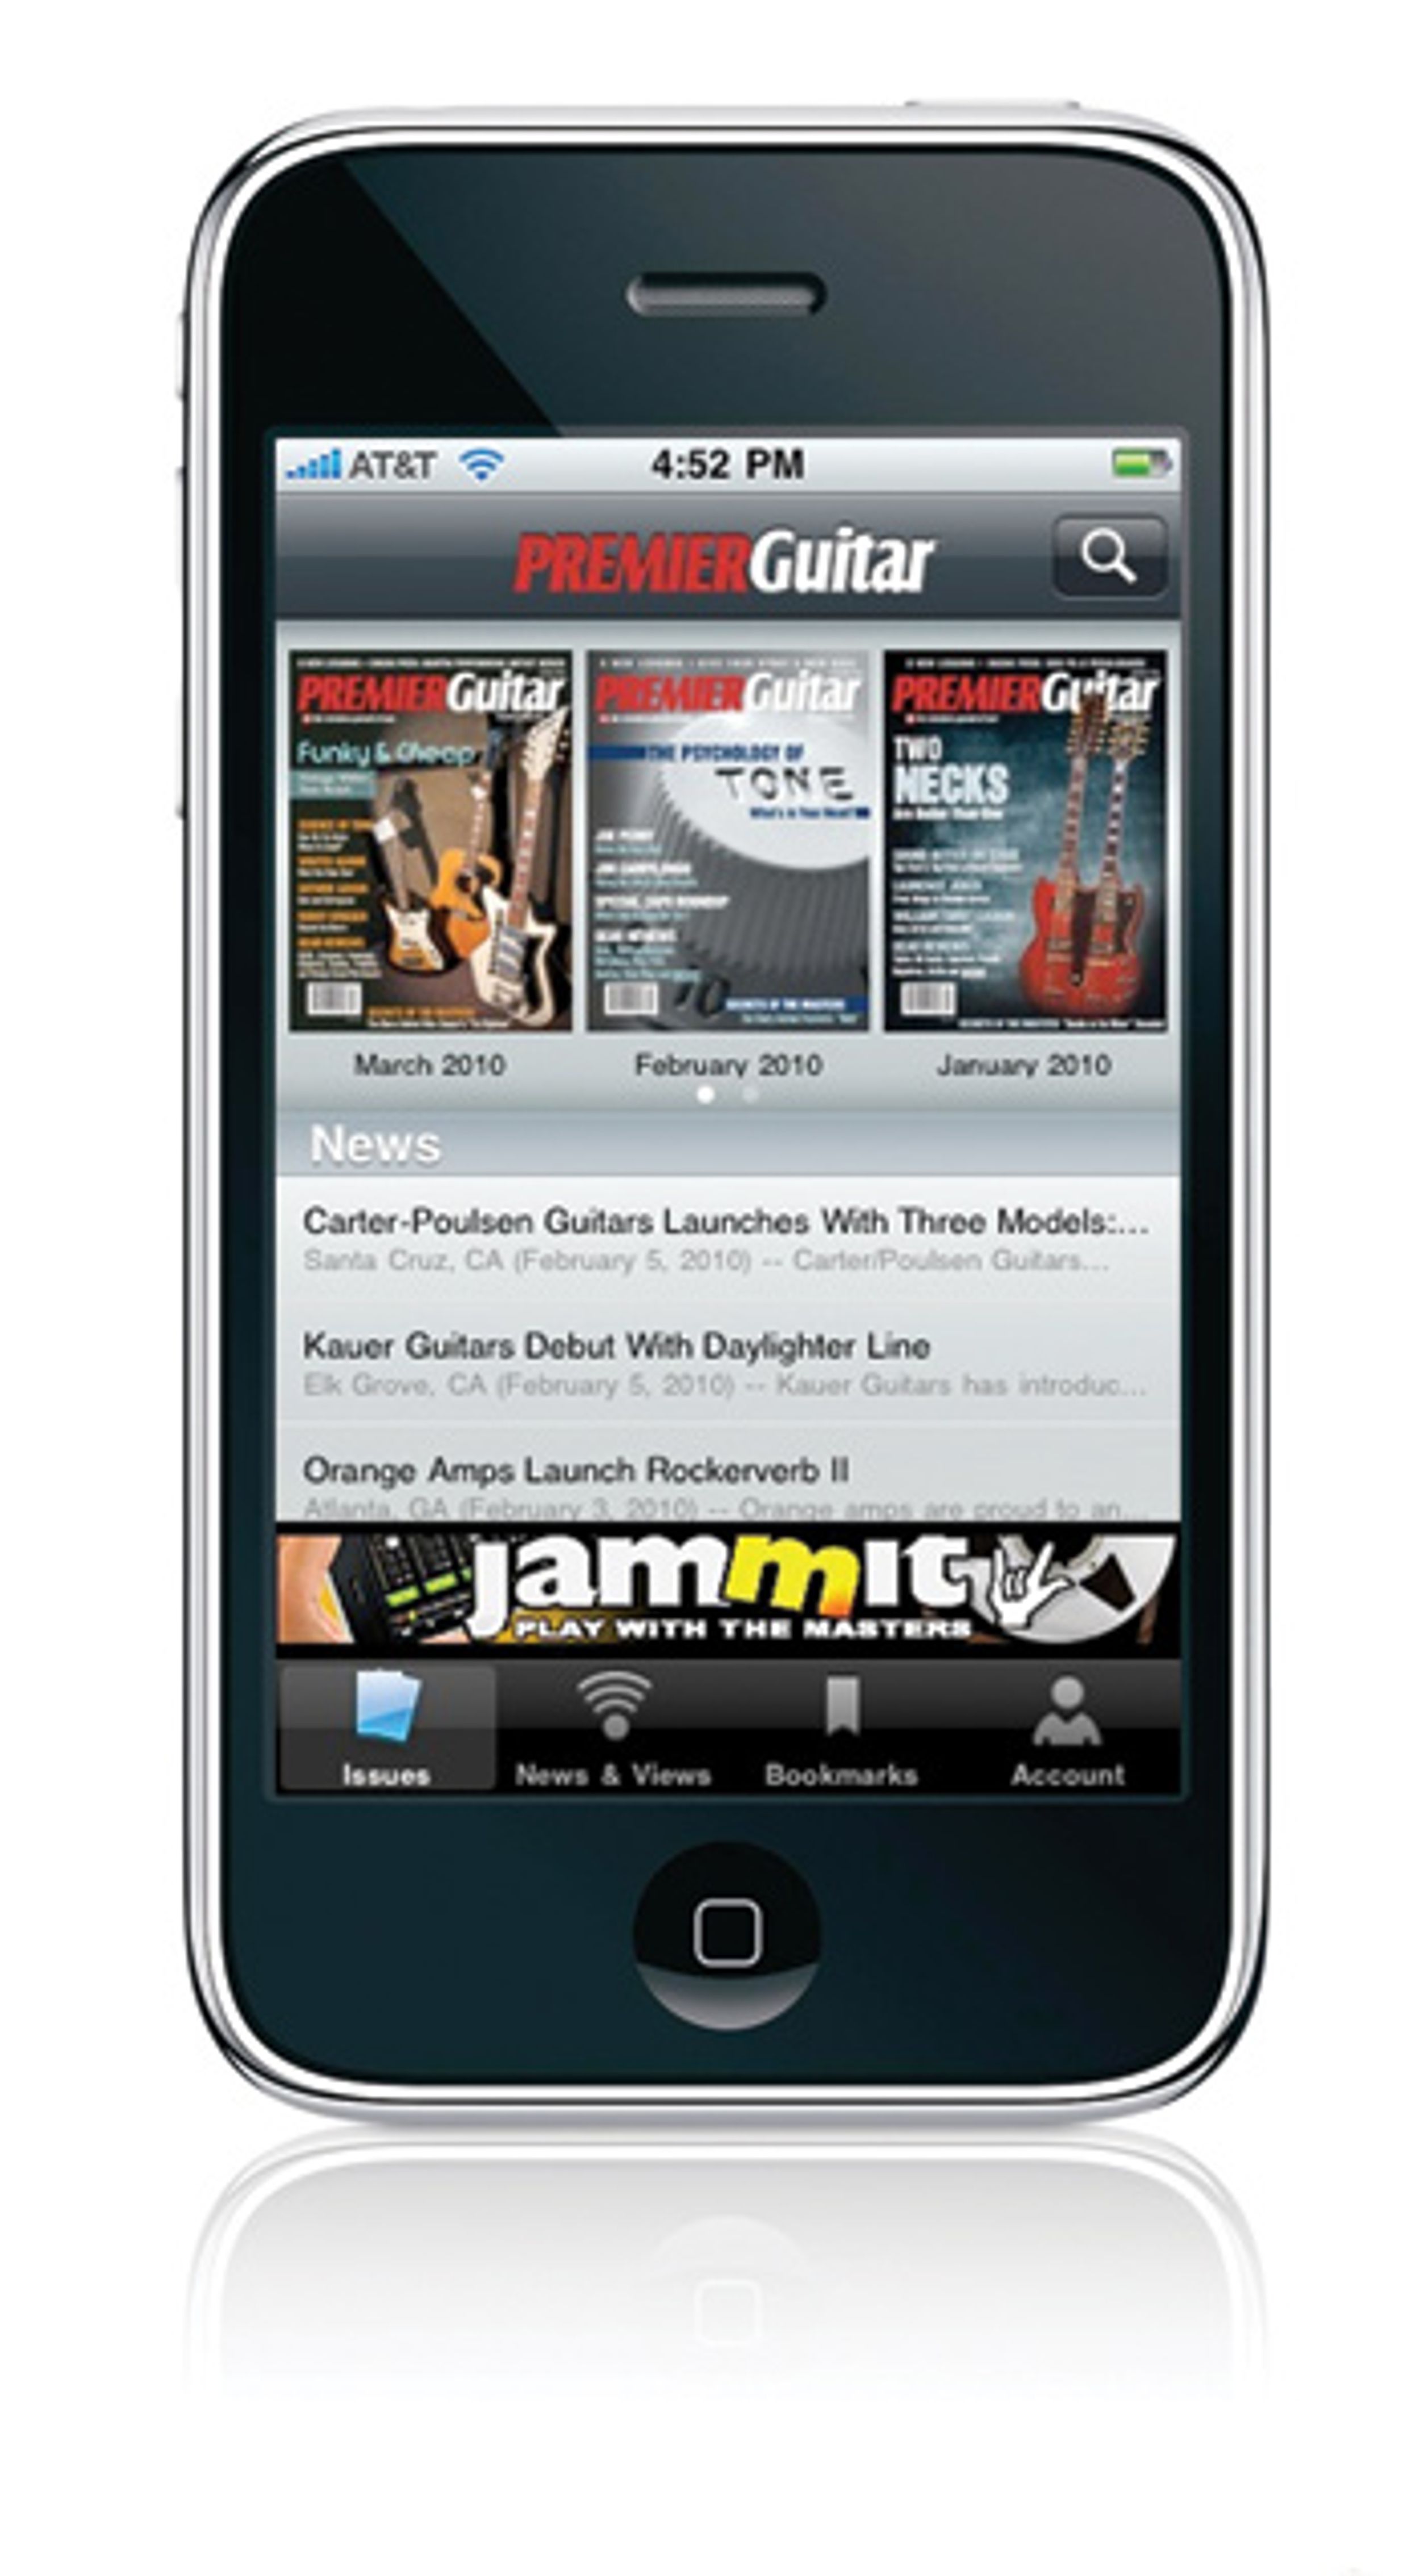 Introducing the Premier Guitar iPhone and iPod Touch App